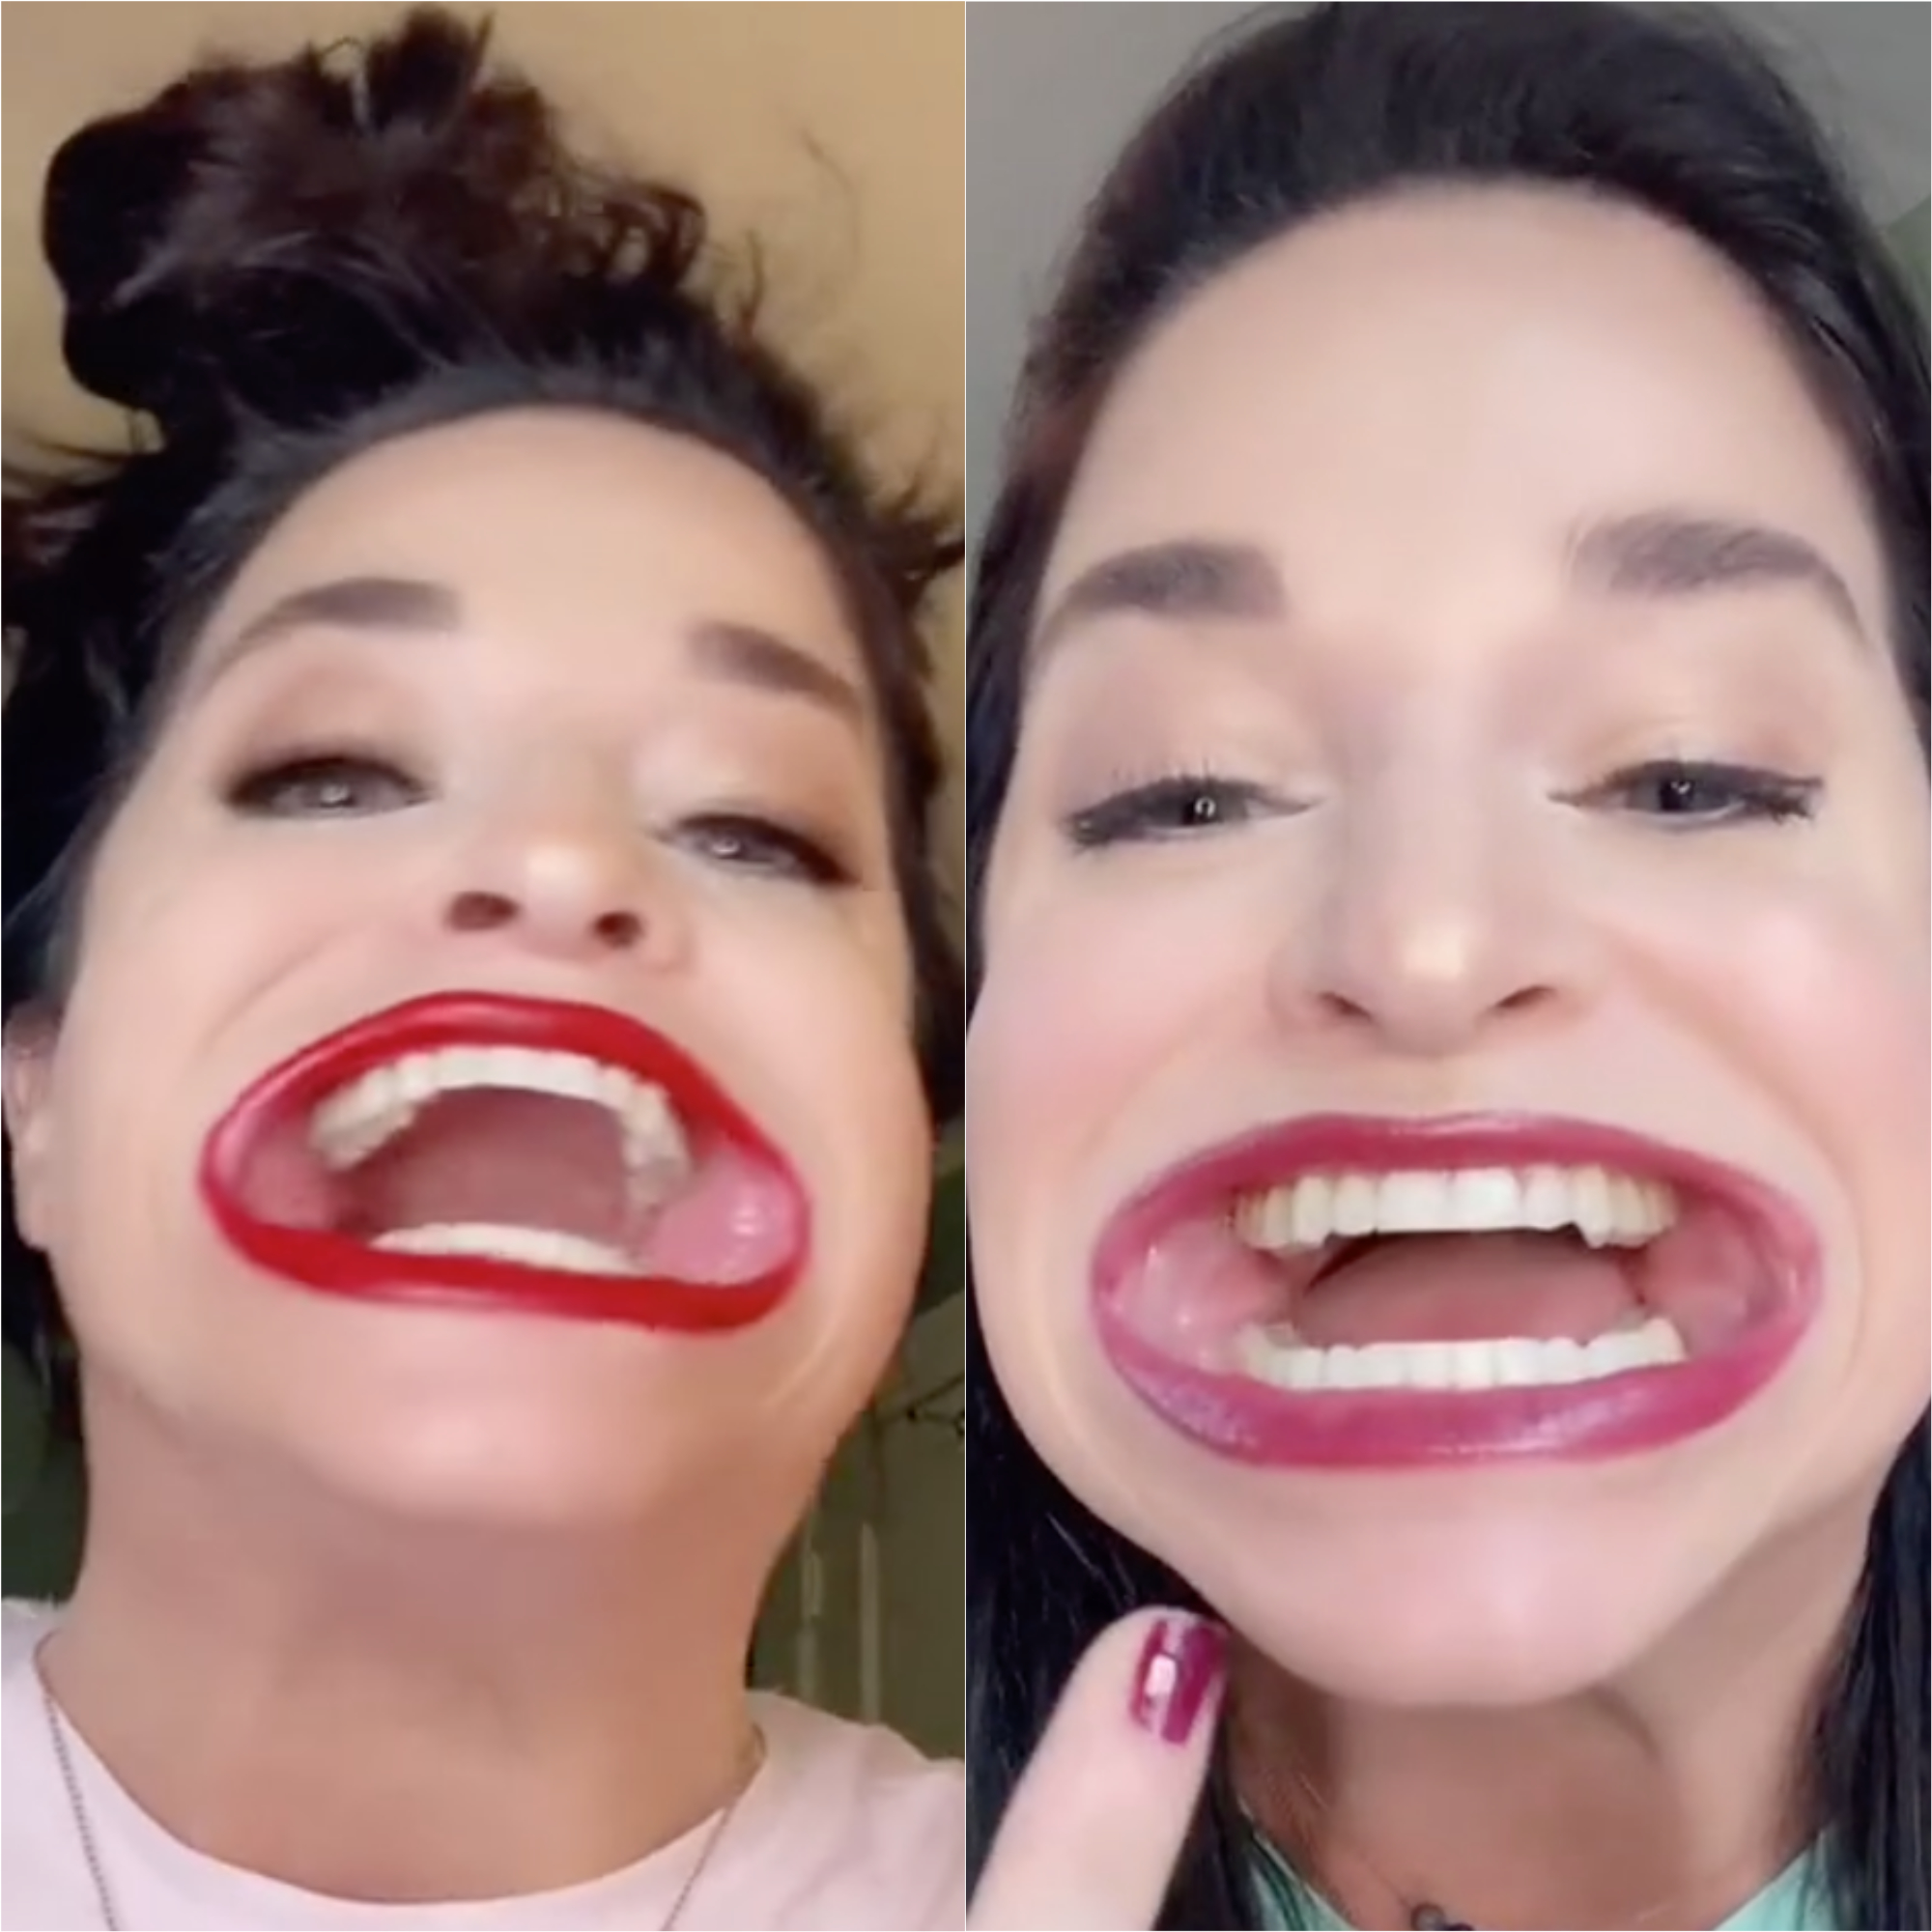 TikTok is freaking out over this woman’s unusually large mouth: ‘Thought this was a filter’